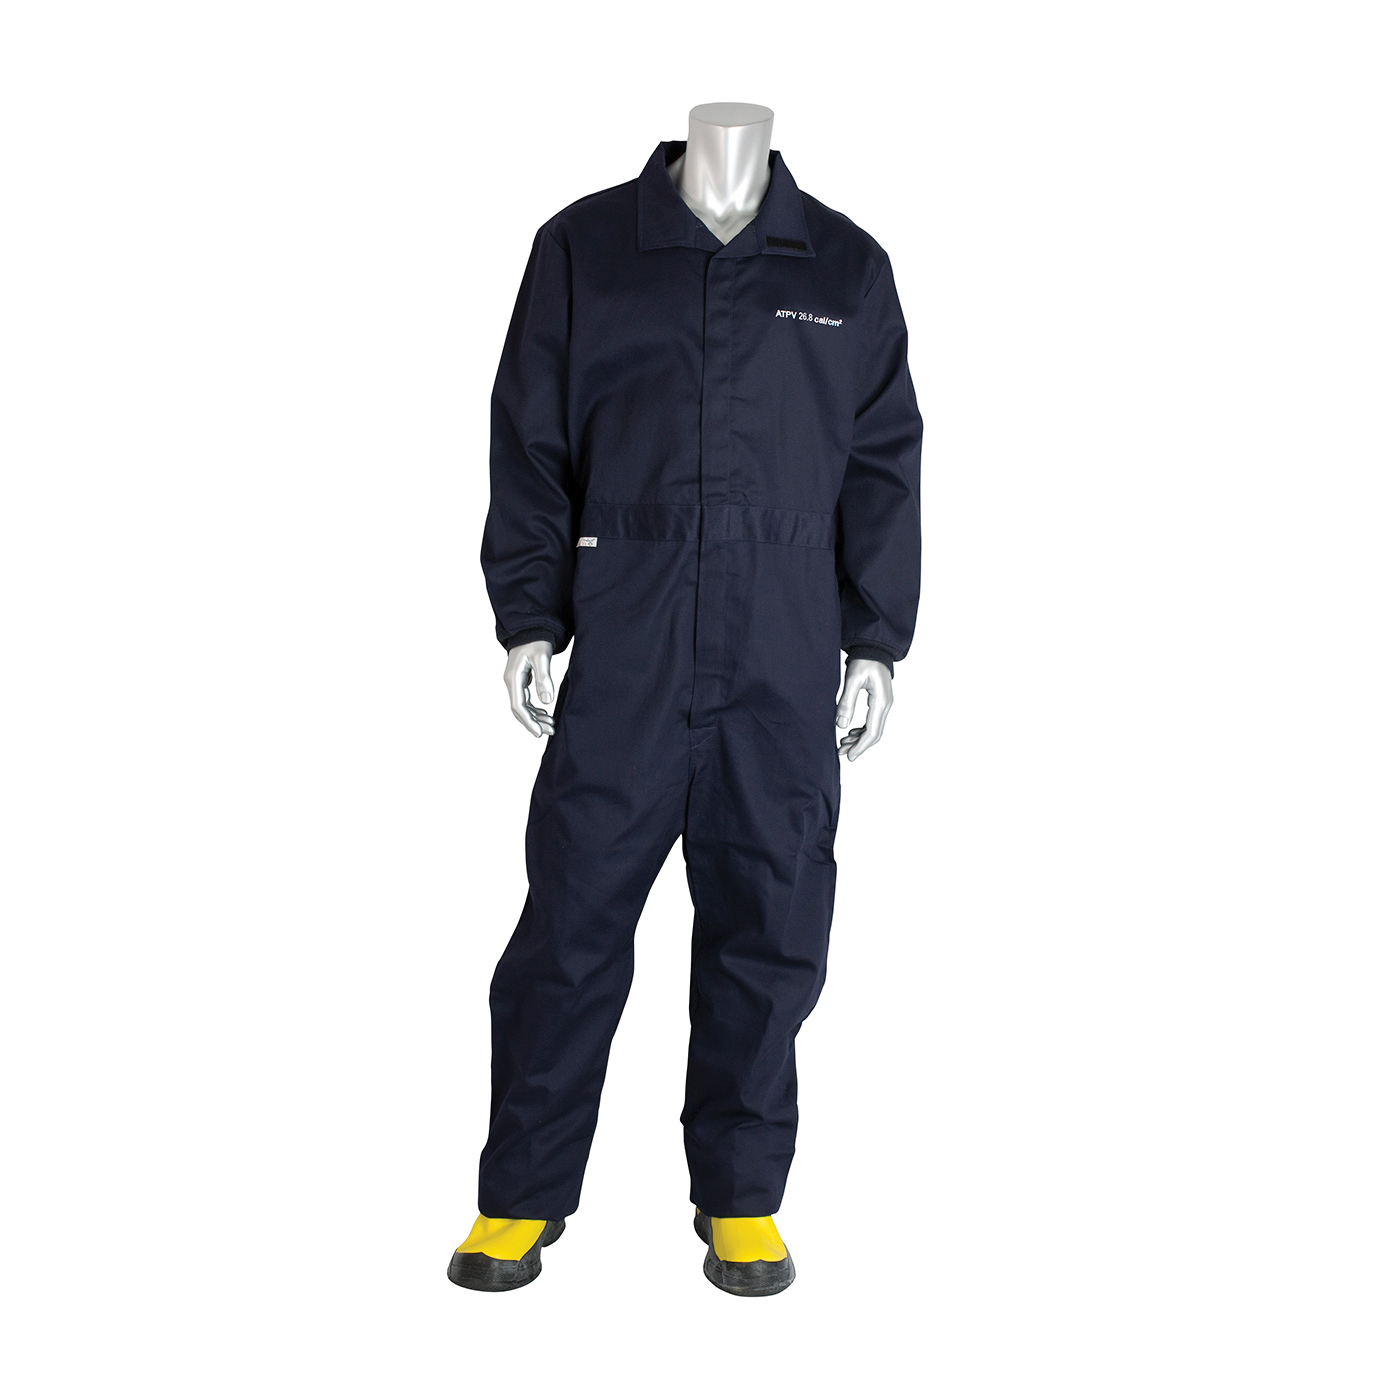 PIP® 9100-52772/3XL Flame Resistant Coverall, 3XL, Navy, Westex® Ultra Soft®/88% Cotton/12% Nylon, 56 to 58 in Chest, 32 in L Inseam